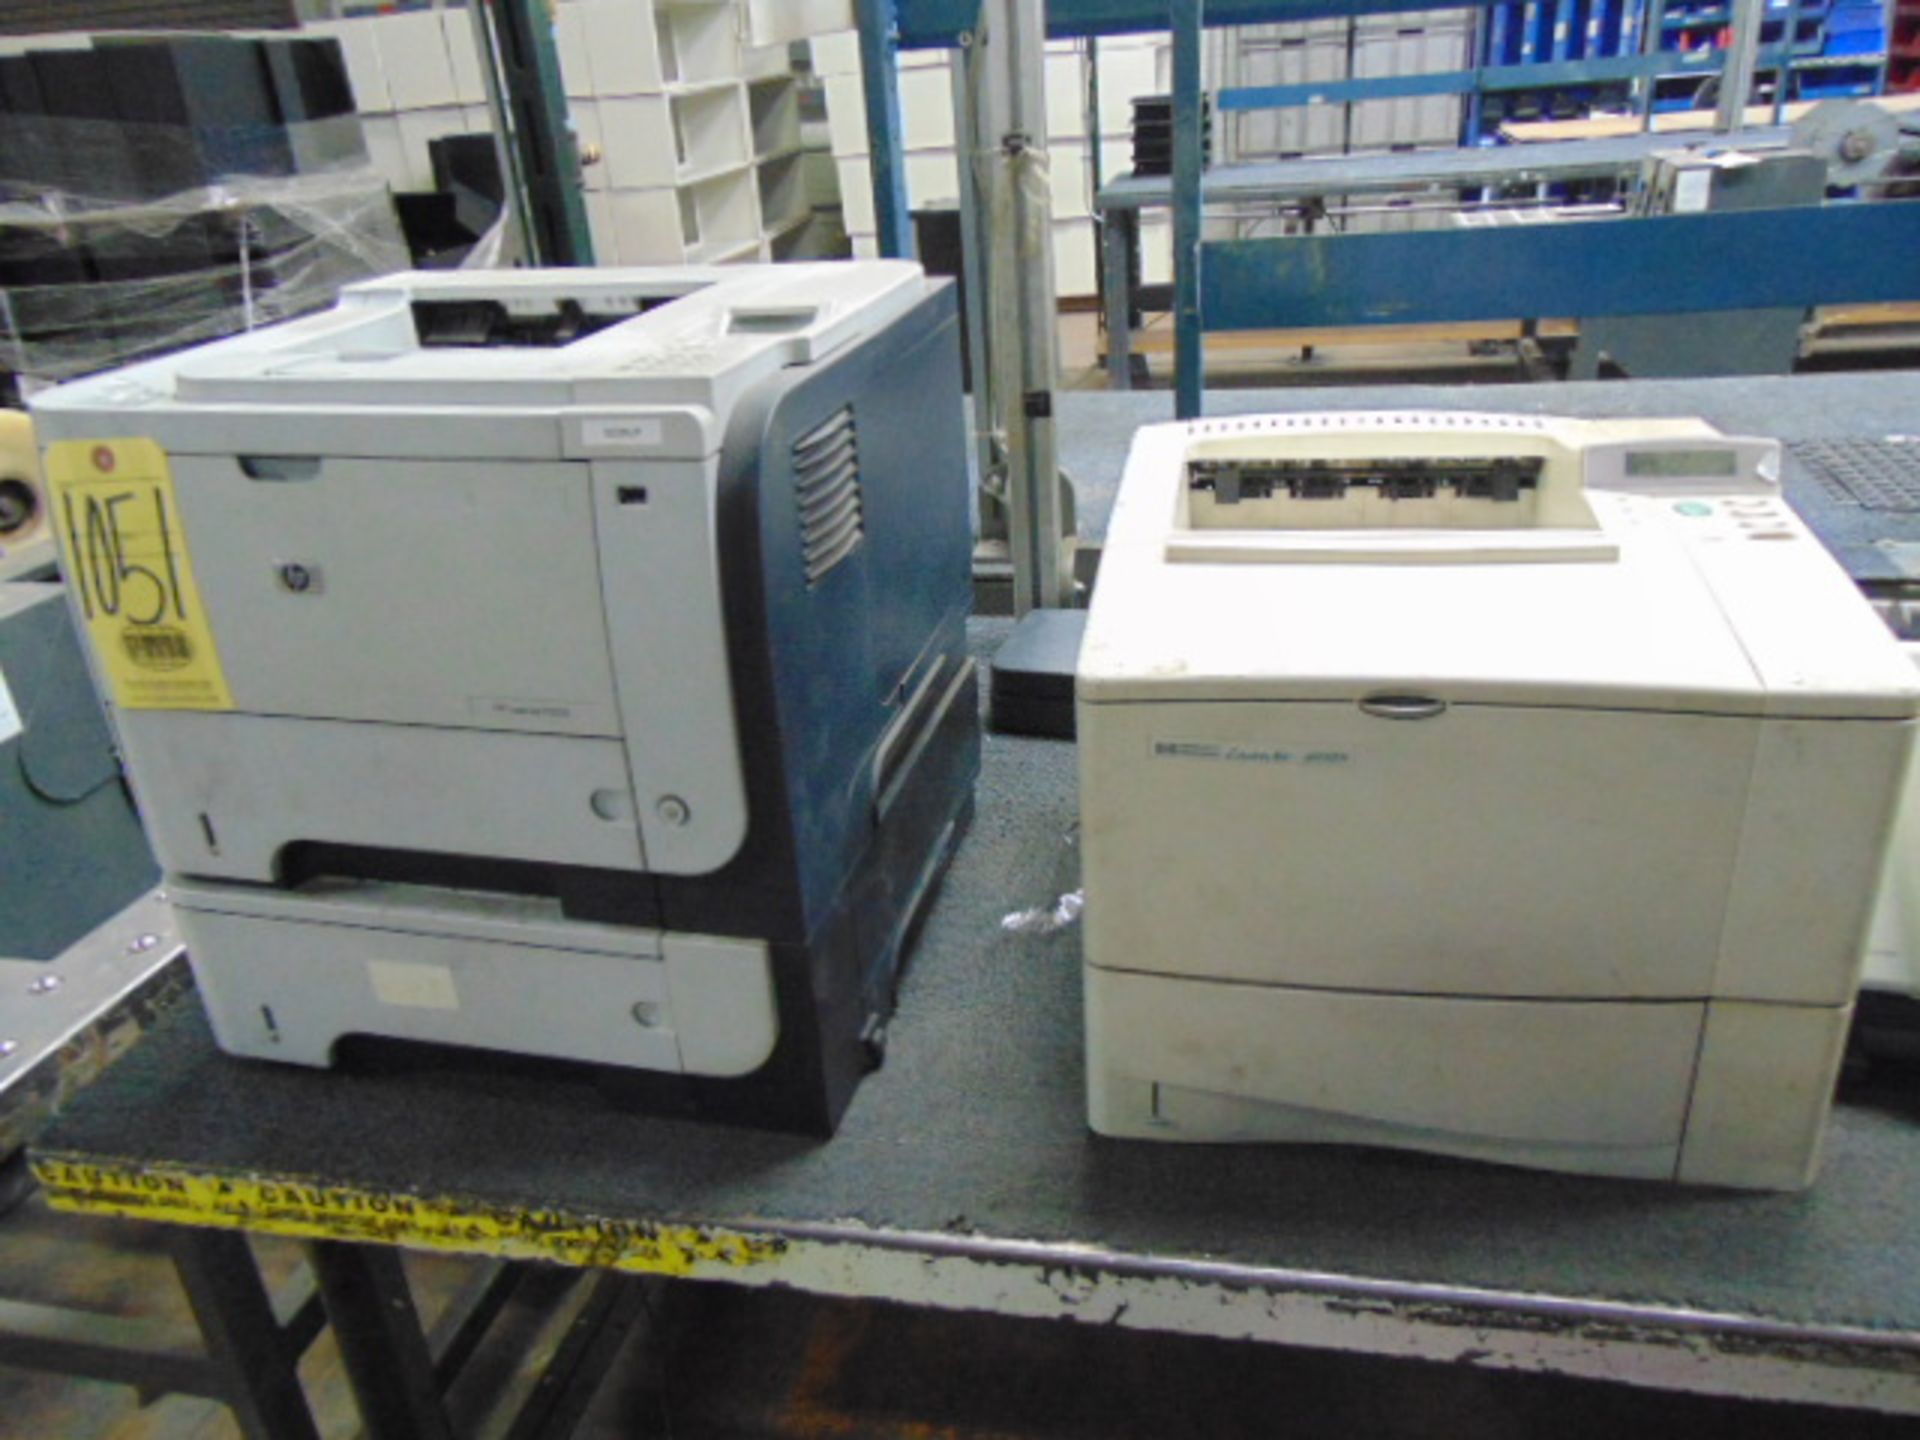 LOT OF PRINTERS (9), assorted